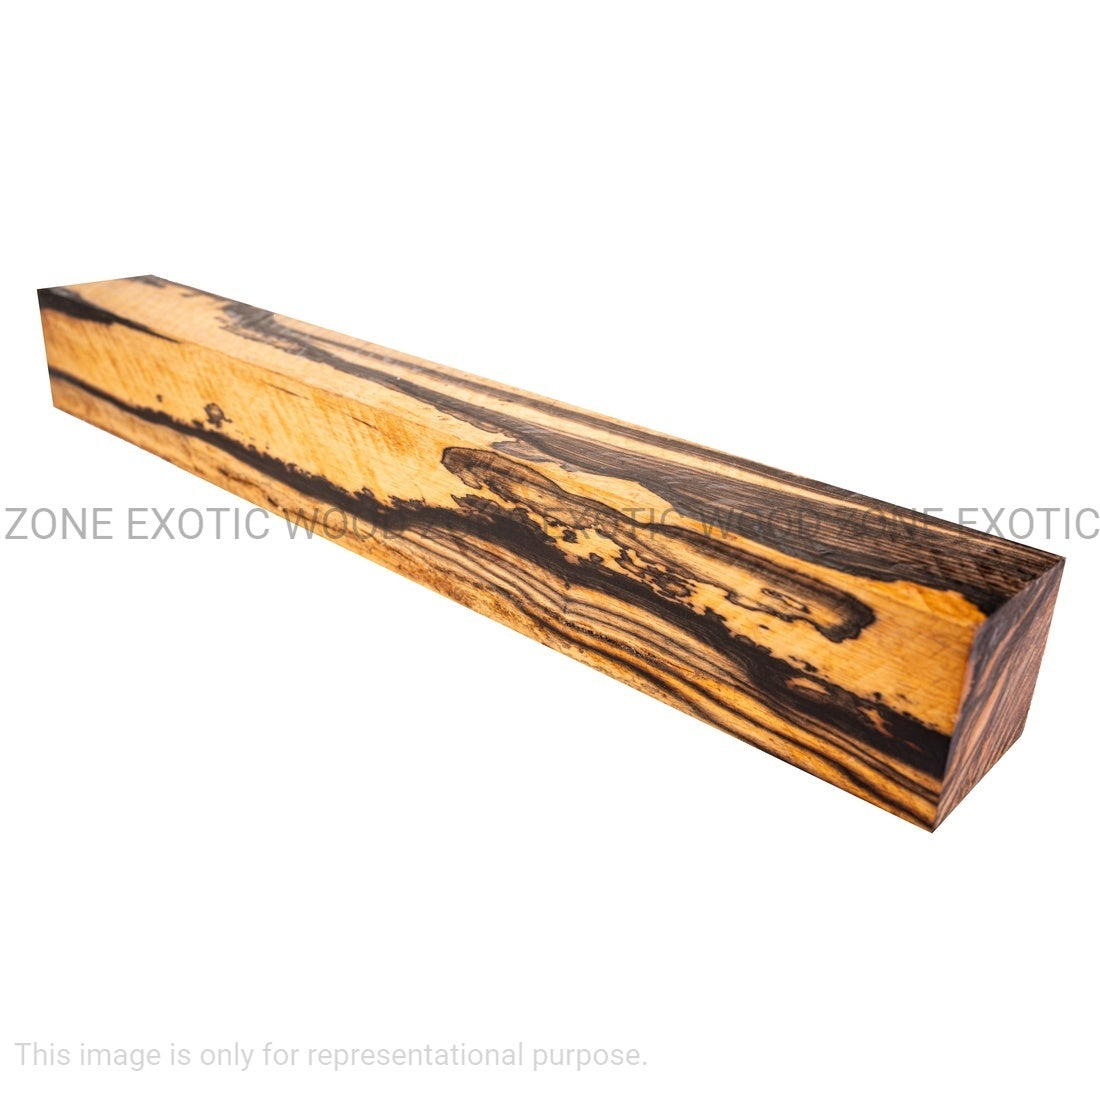 Pack of 5, Black and White Ebony Hobby Wood/ Turning Blanks 1&quot;x 1&quot;x 12&quot; - Exotic Wood Zone - Buy online Across USA 